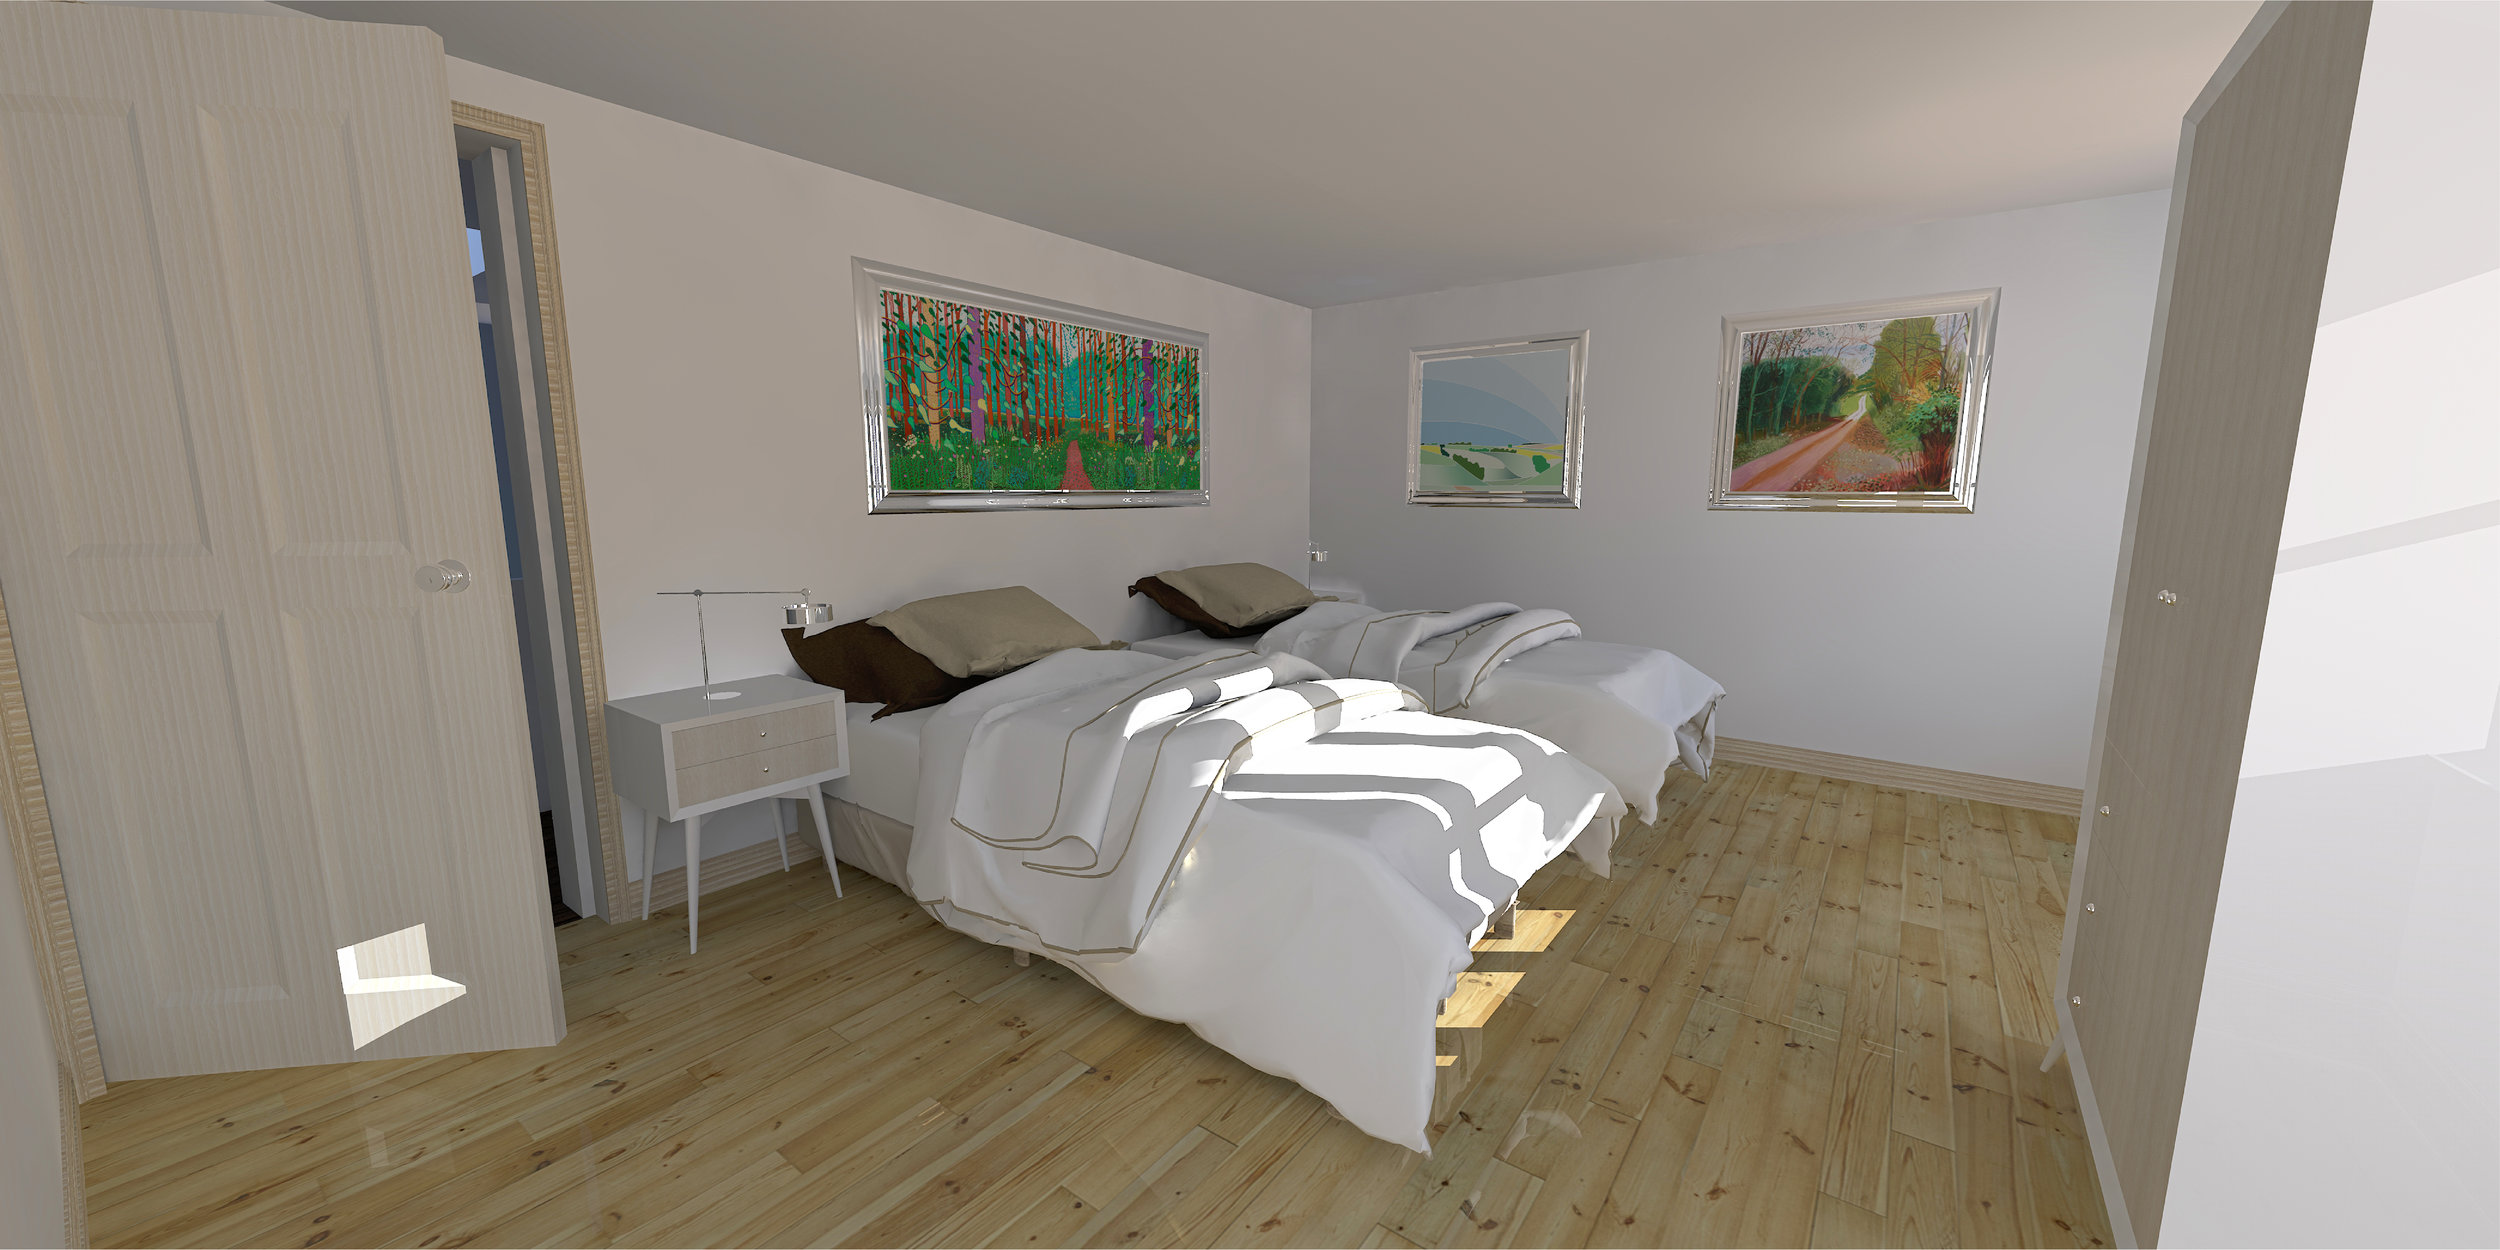 Proposed Guest Bedroom